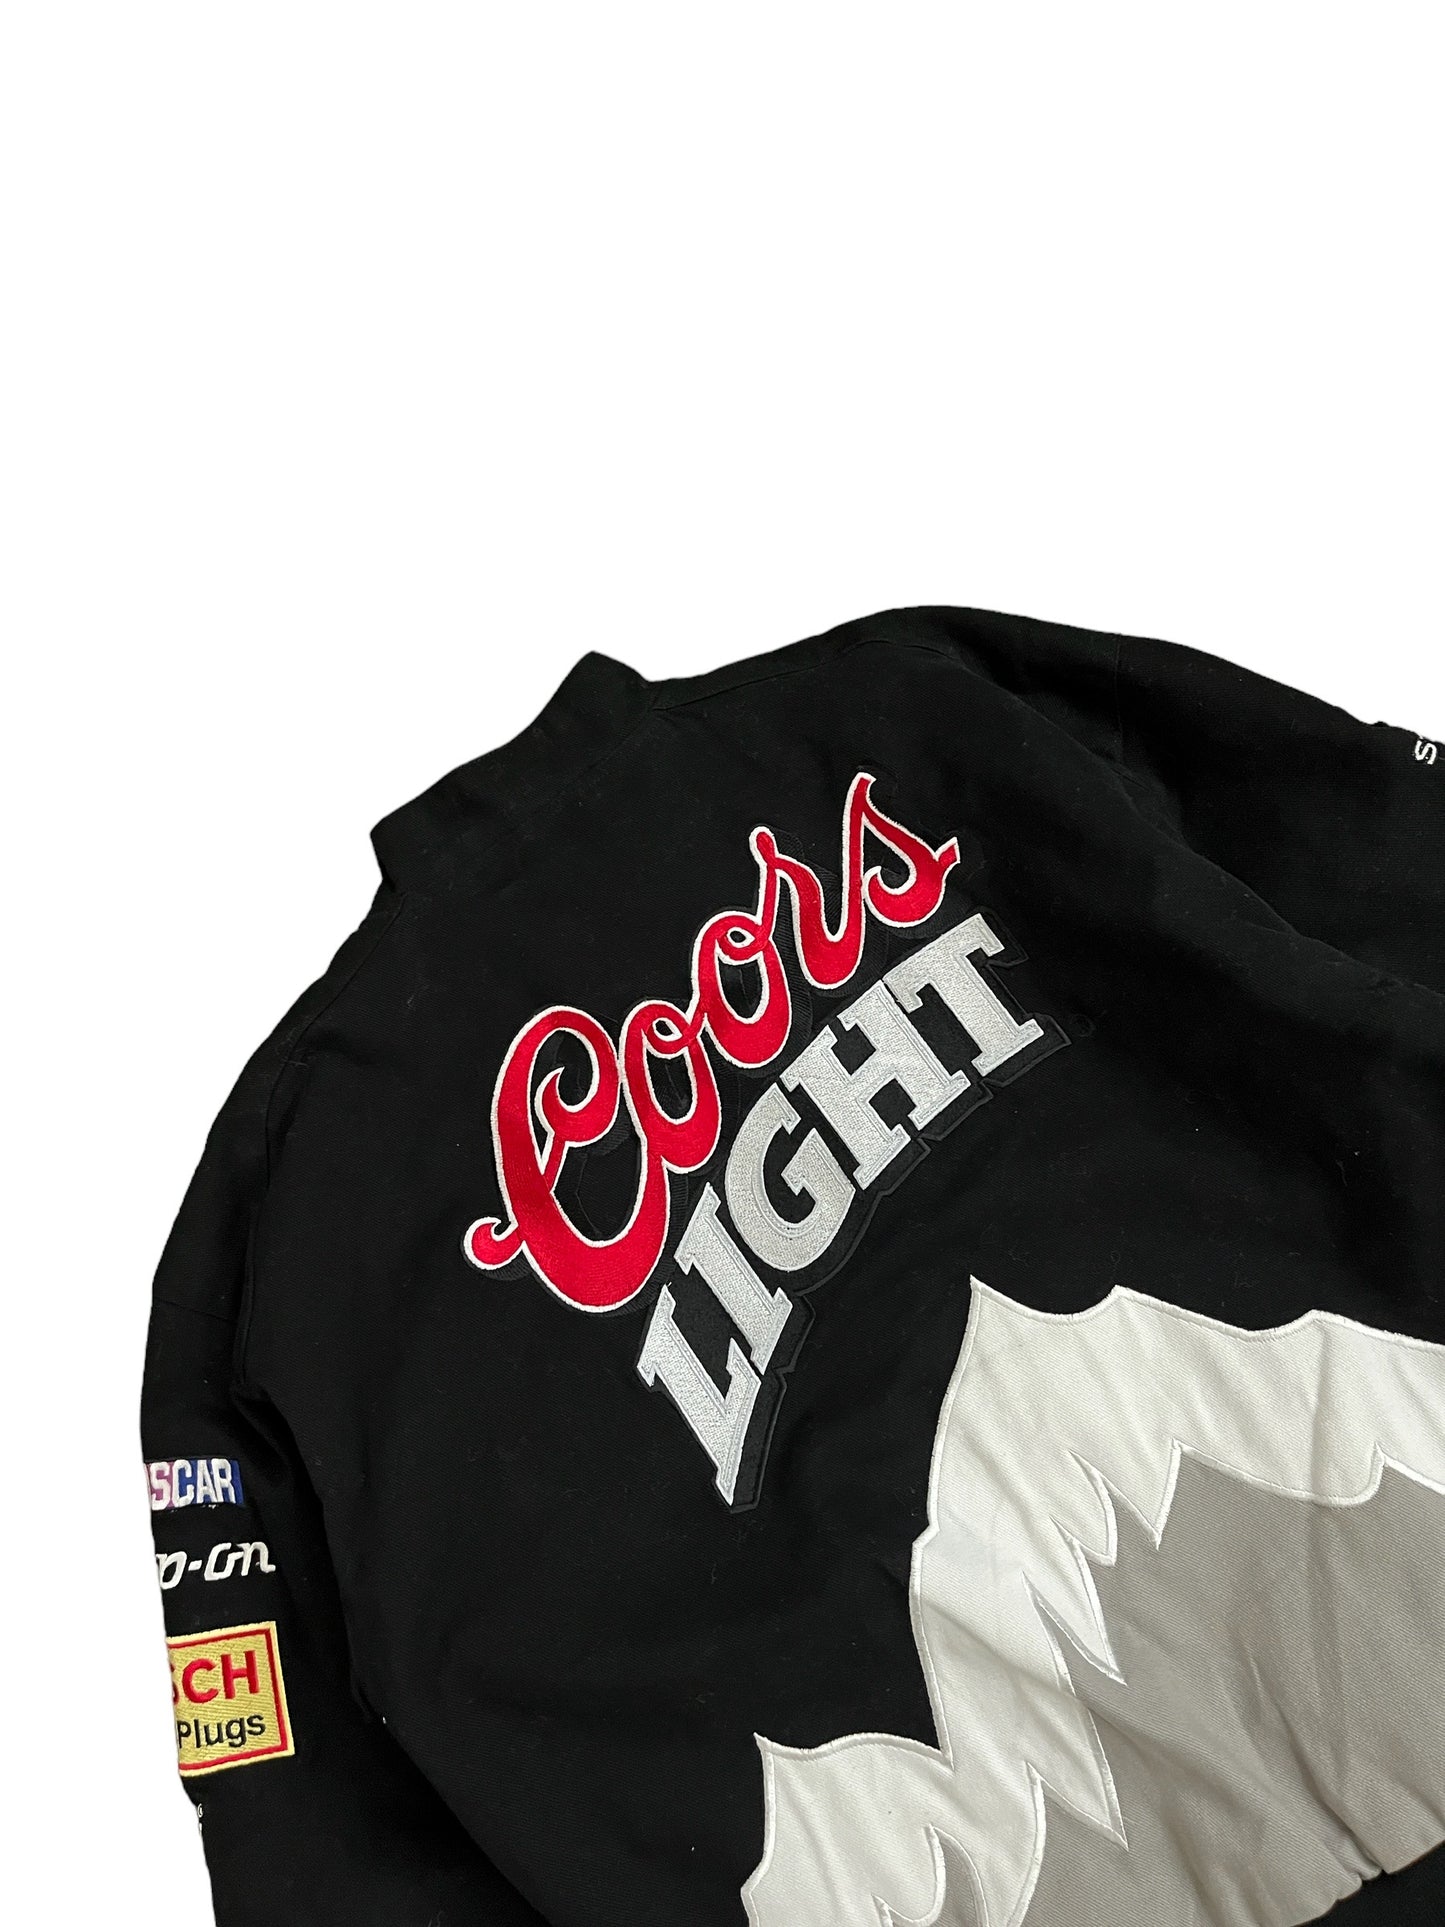 Limited Edition Vintage Nascar "Coors Light" by Jeff Hamilton Racing Jacket